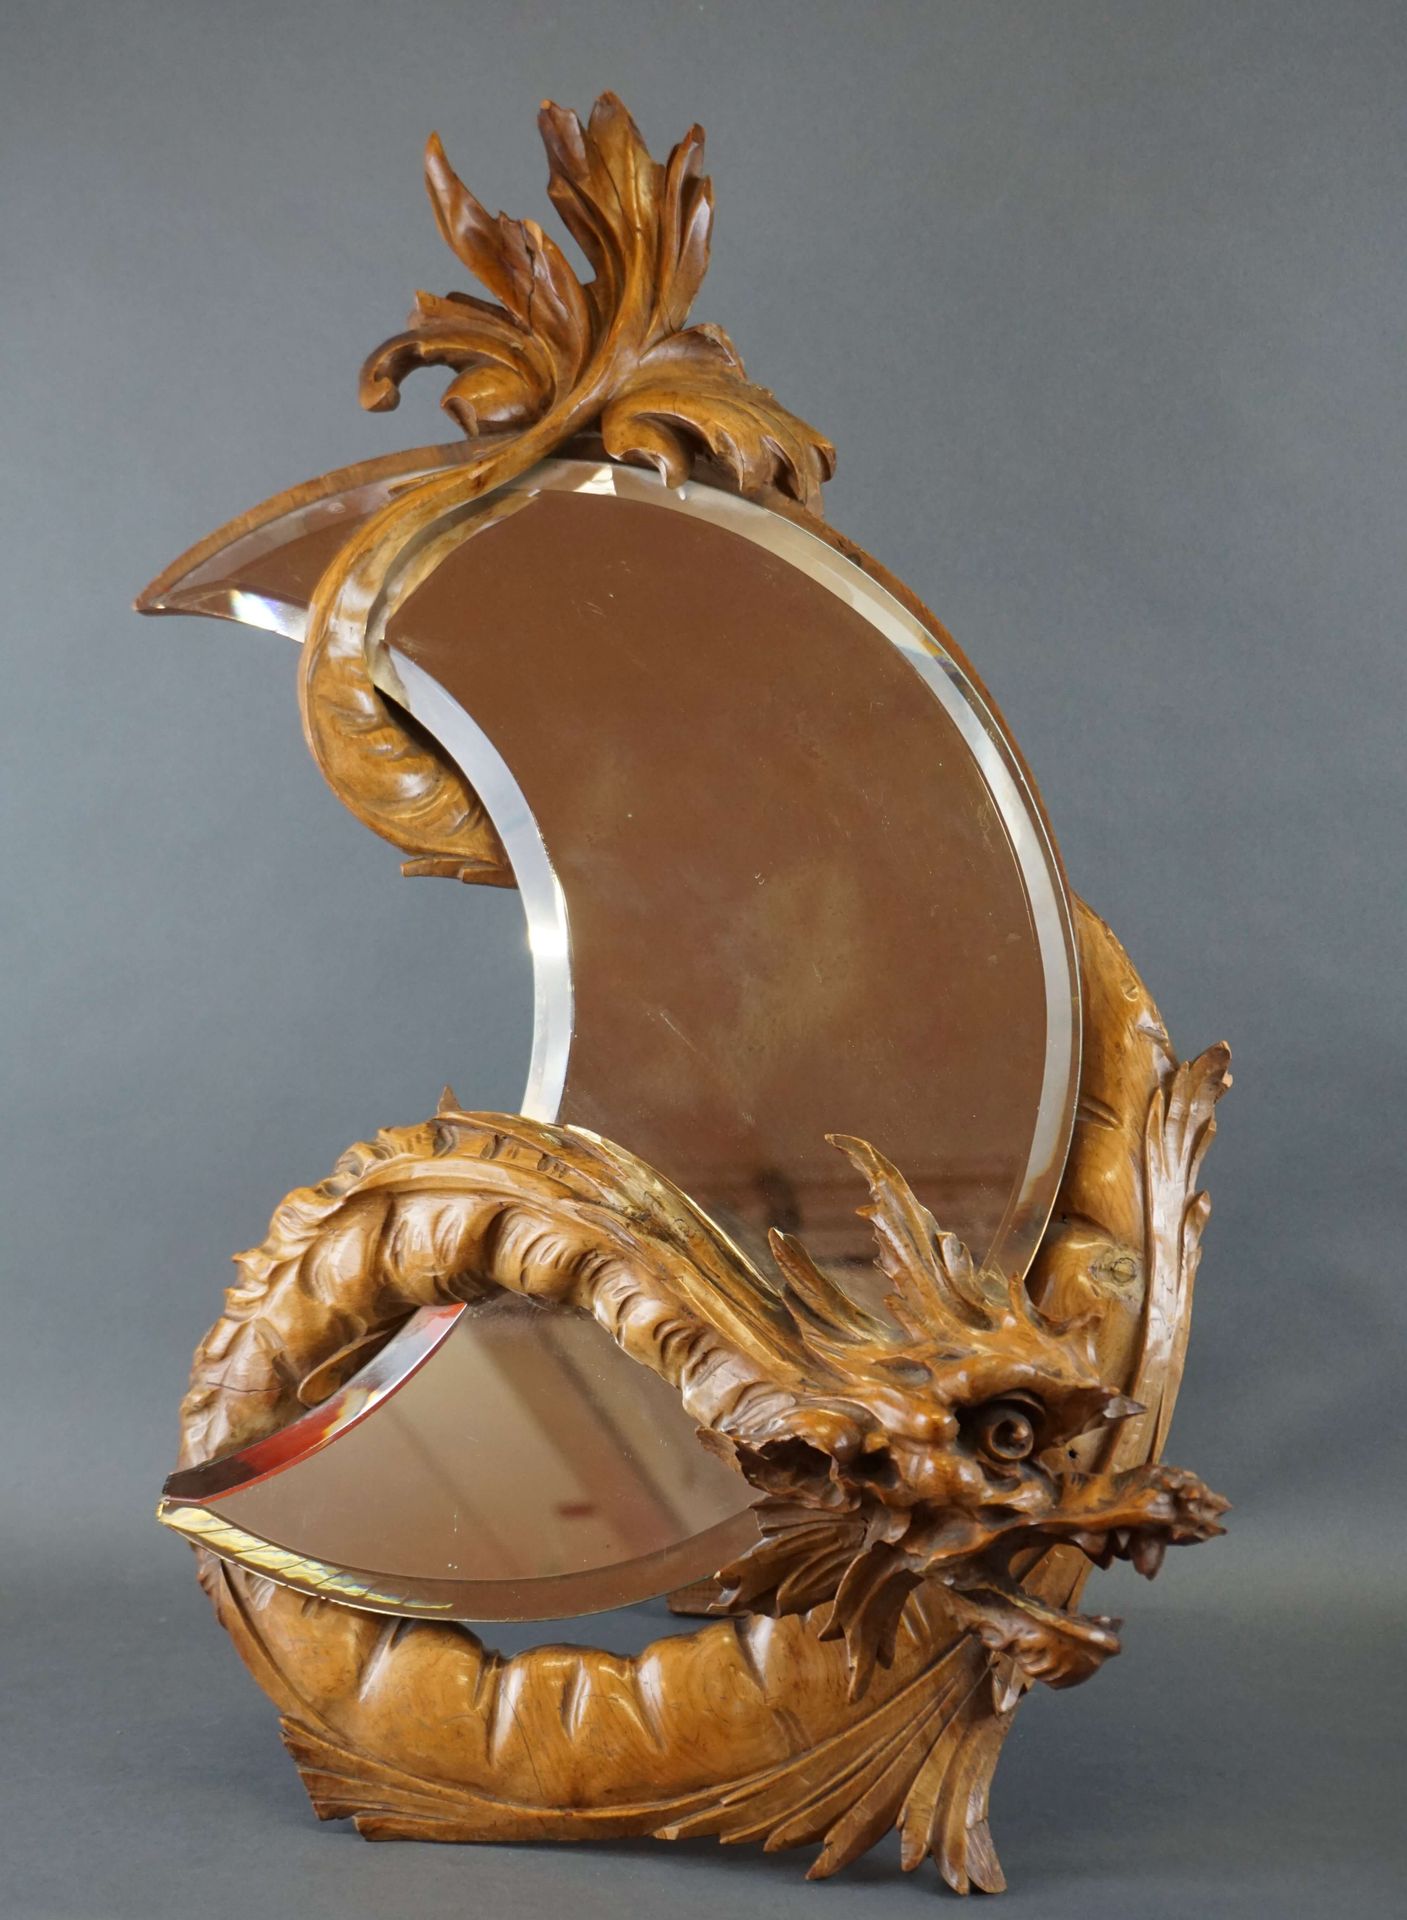 Null Crescent moon mirror decorated with a carved wooden dragon. The dragon's ta&hellip;